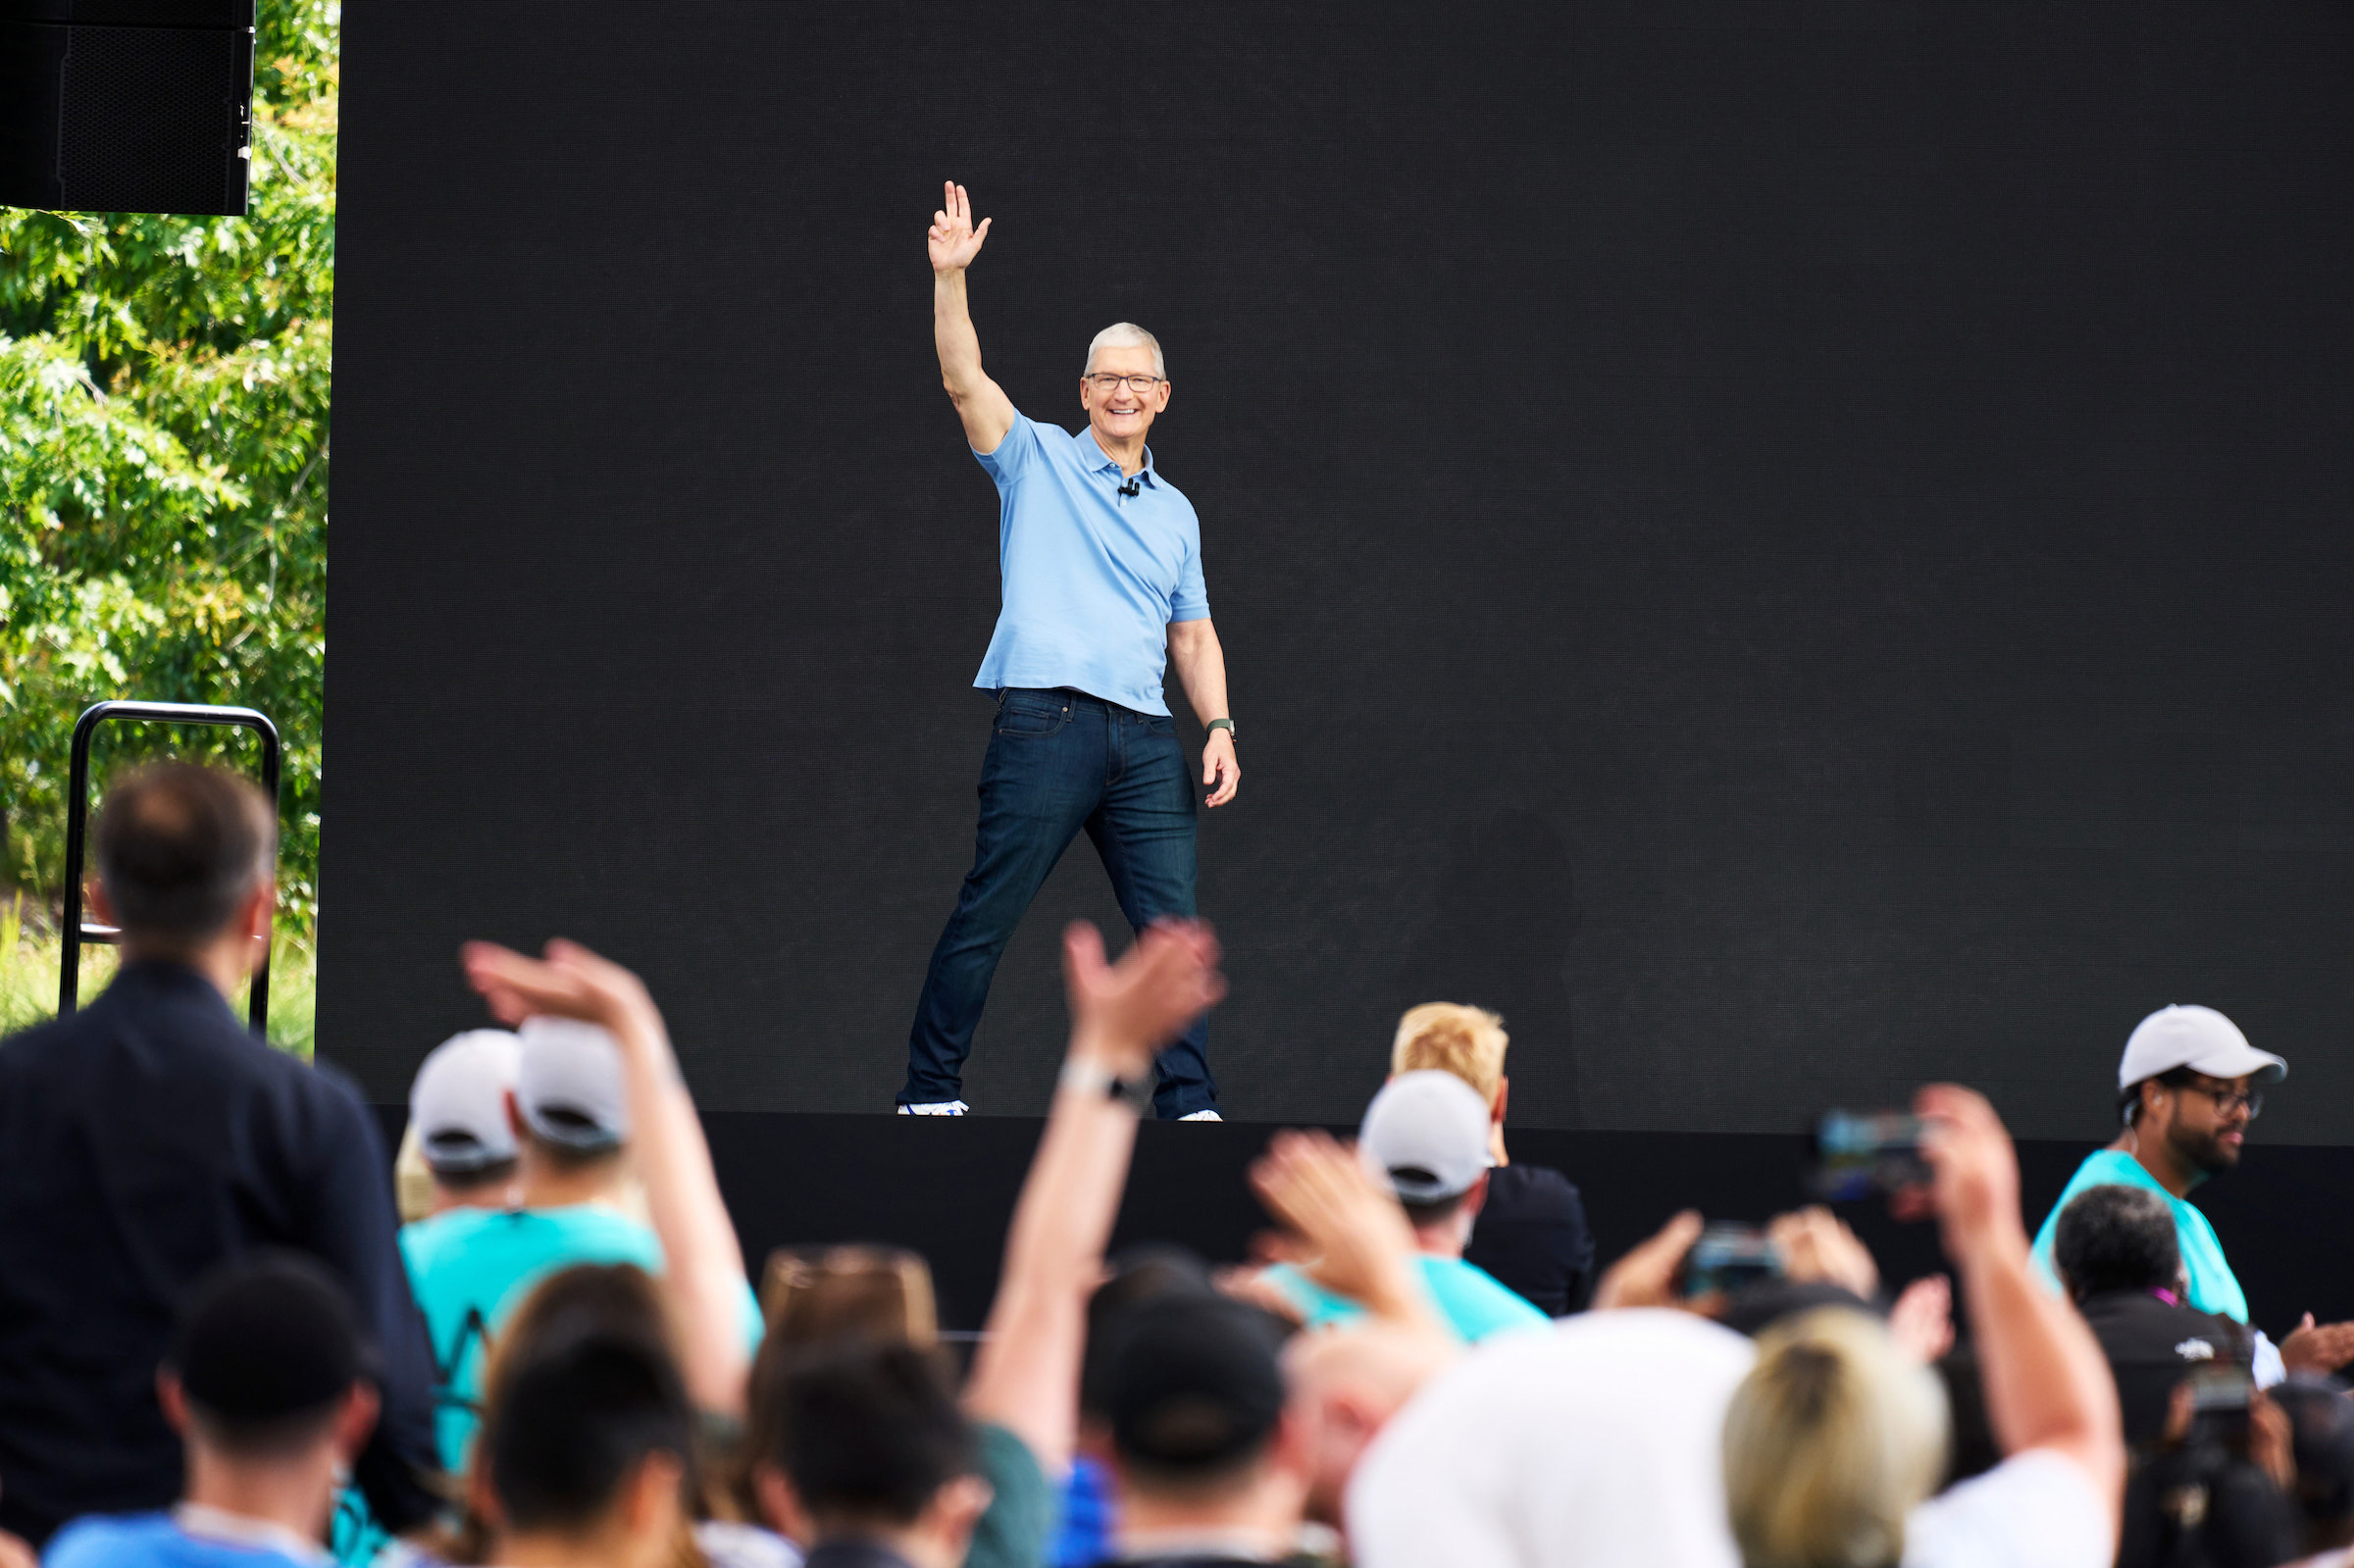 Tim Cook has amazing arms.